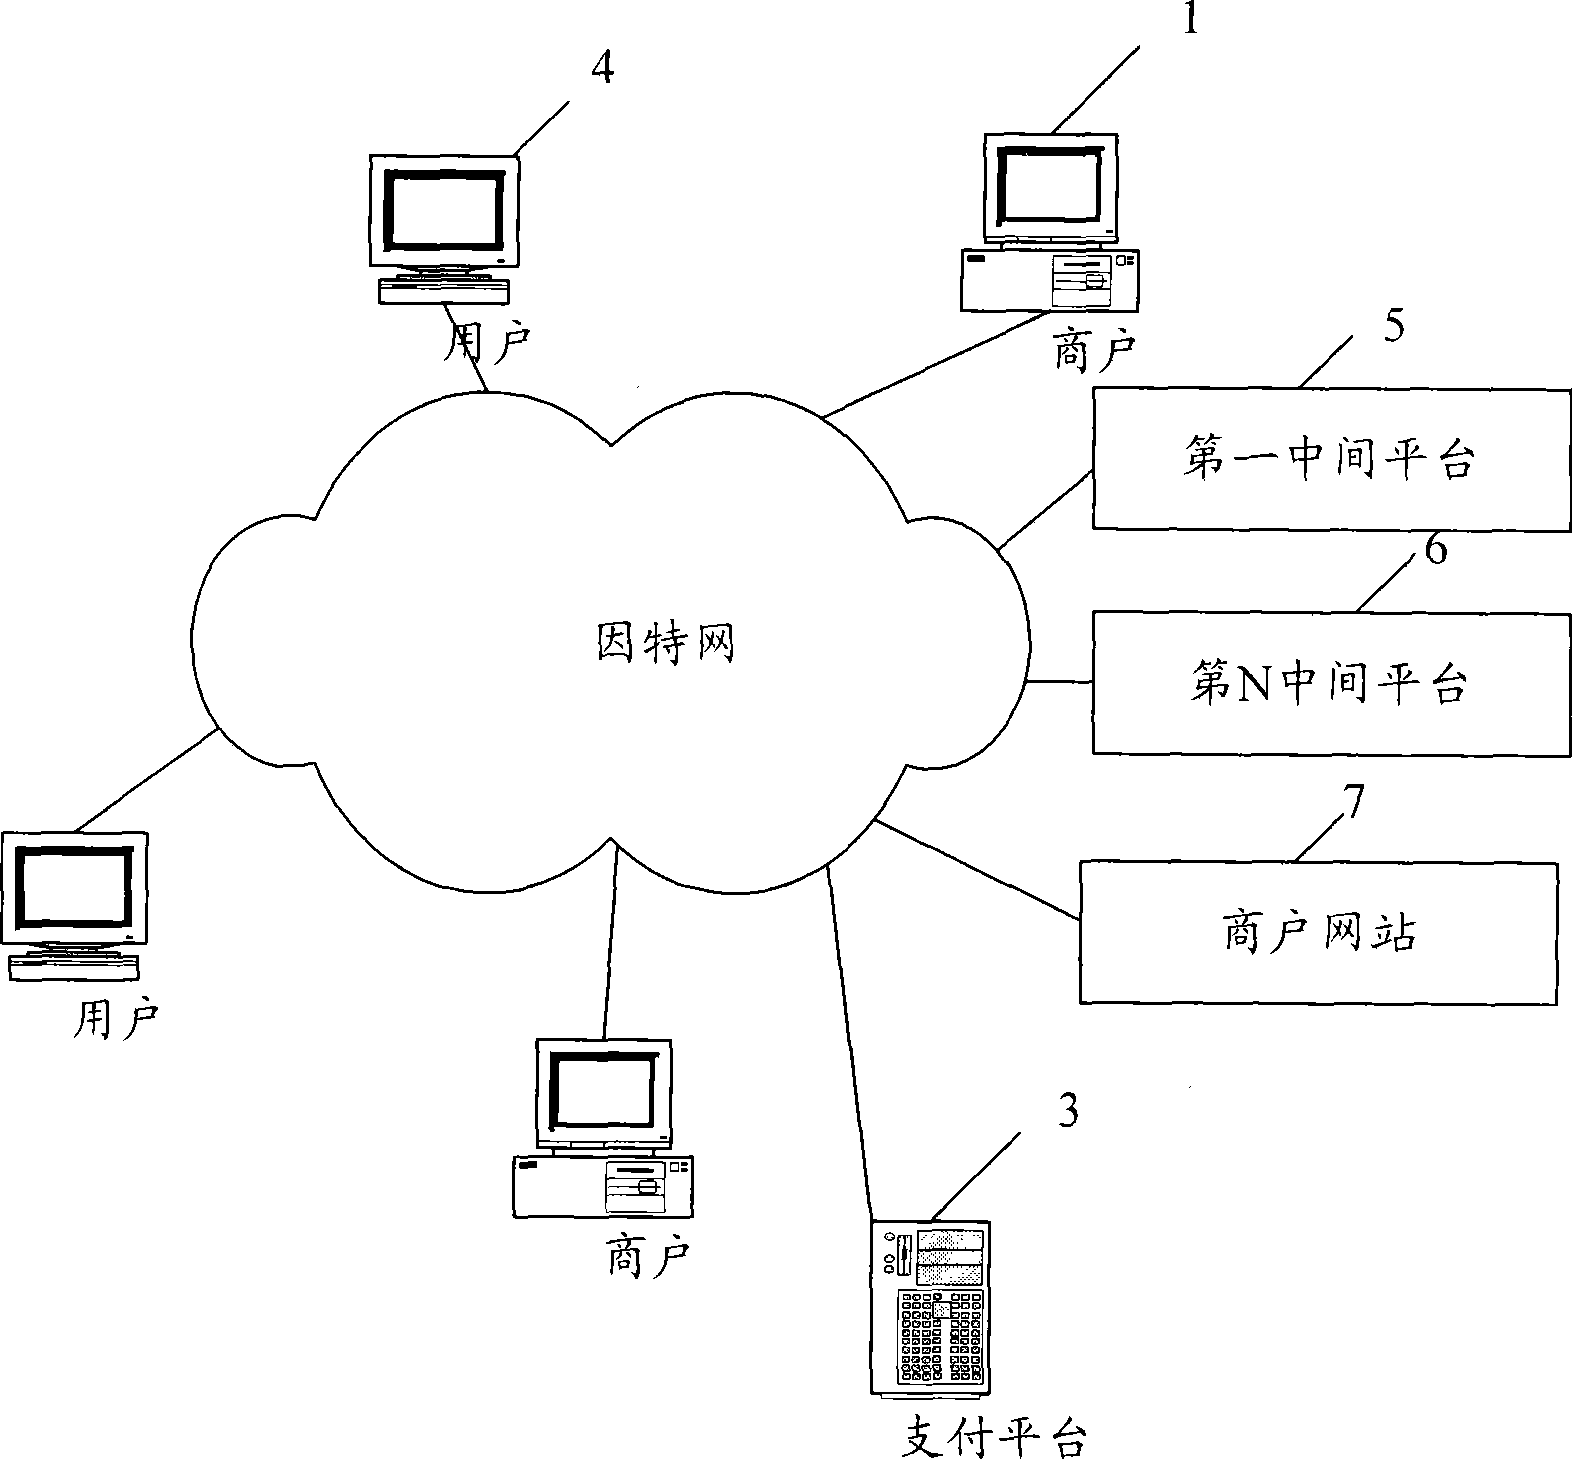 System and method for networking trading using intermediate platform